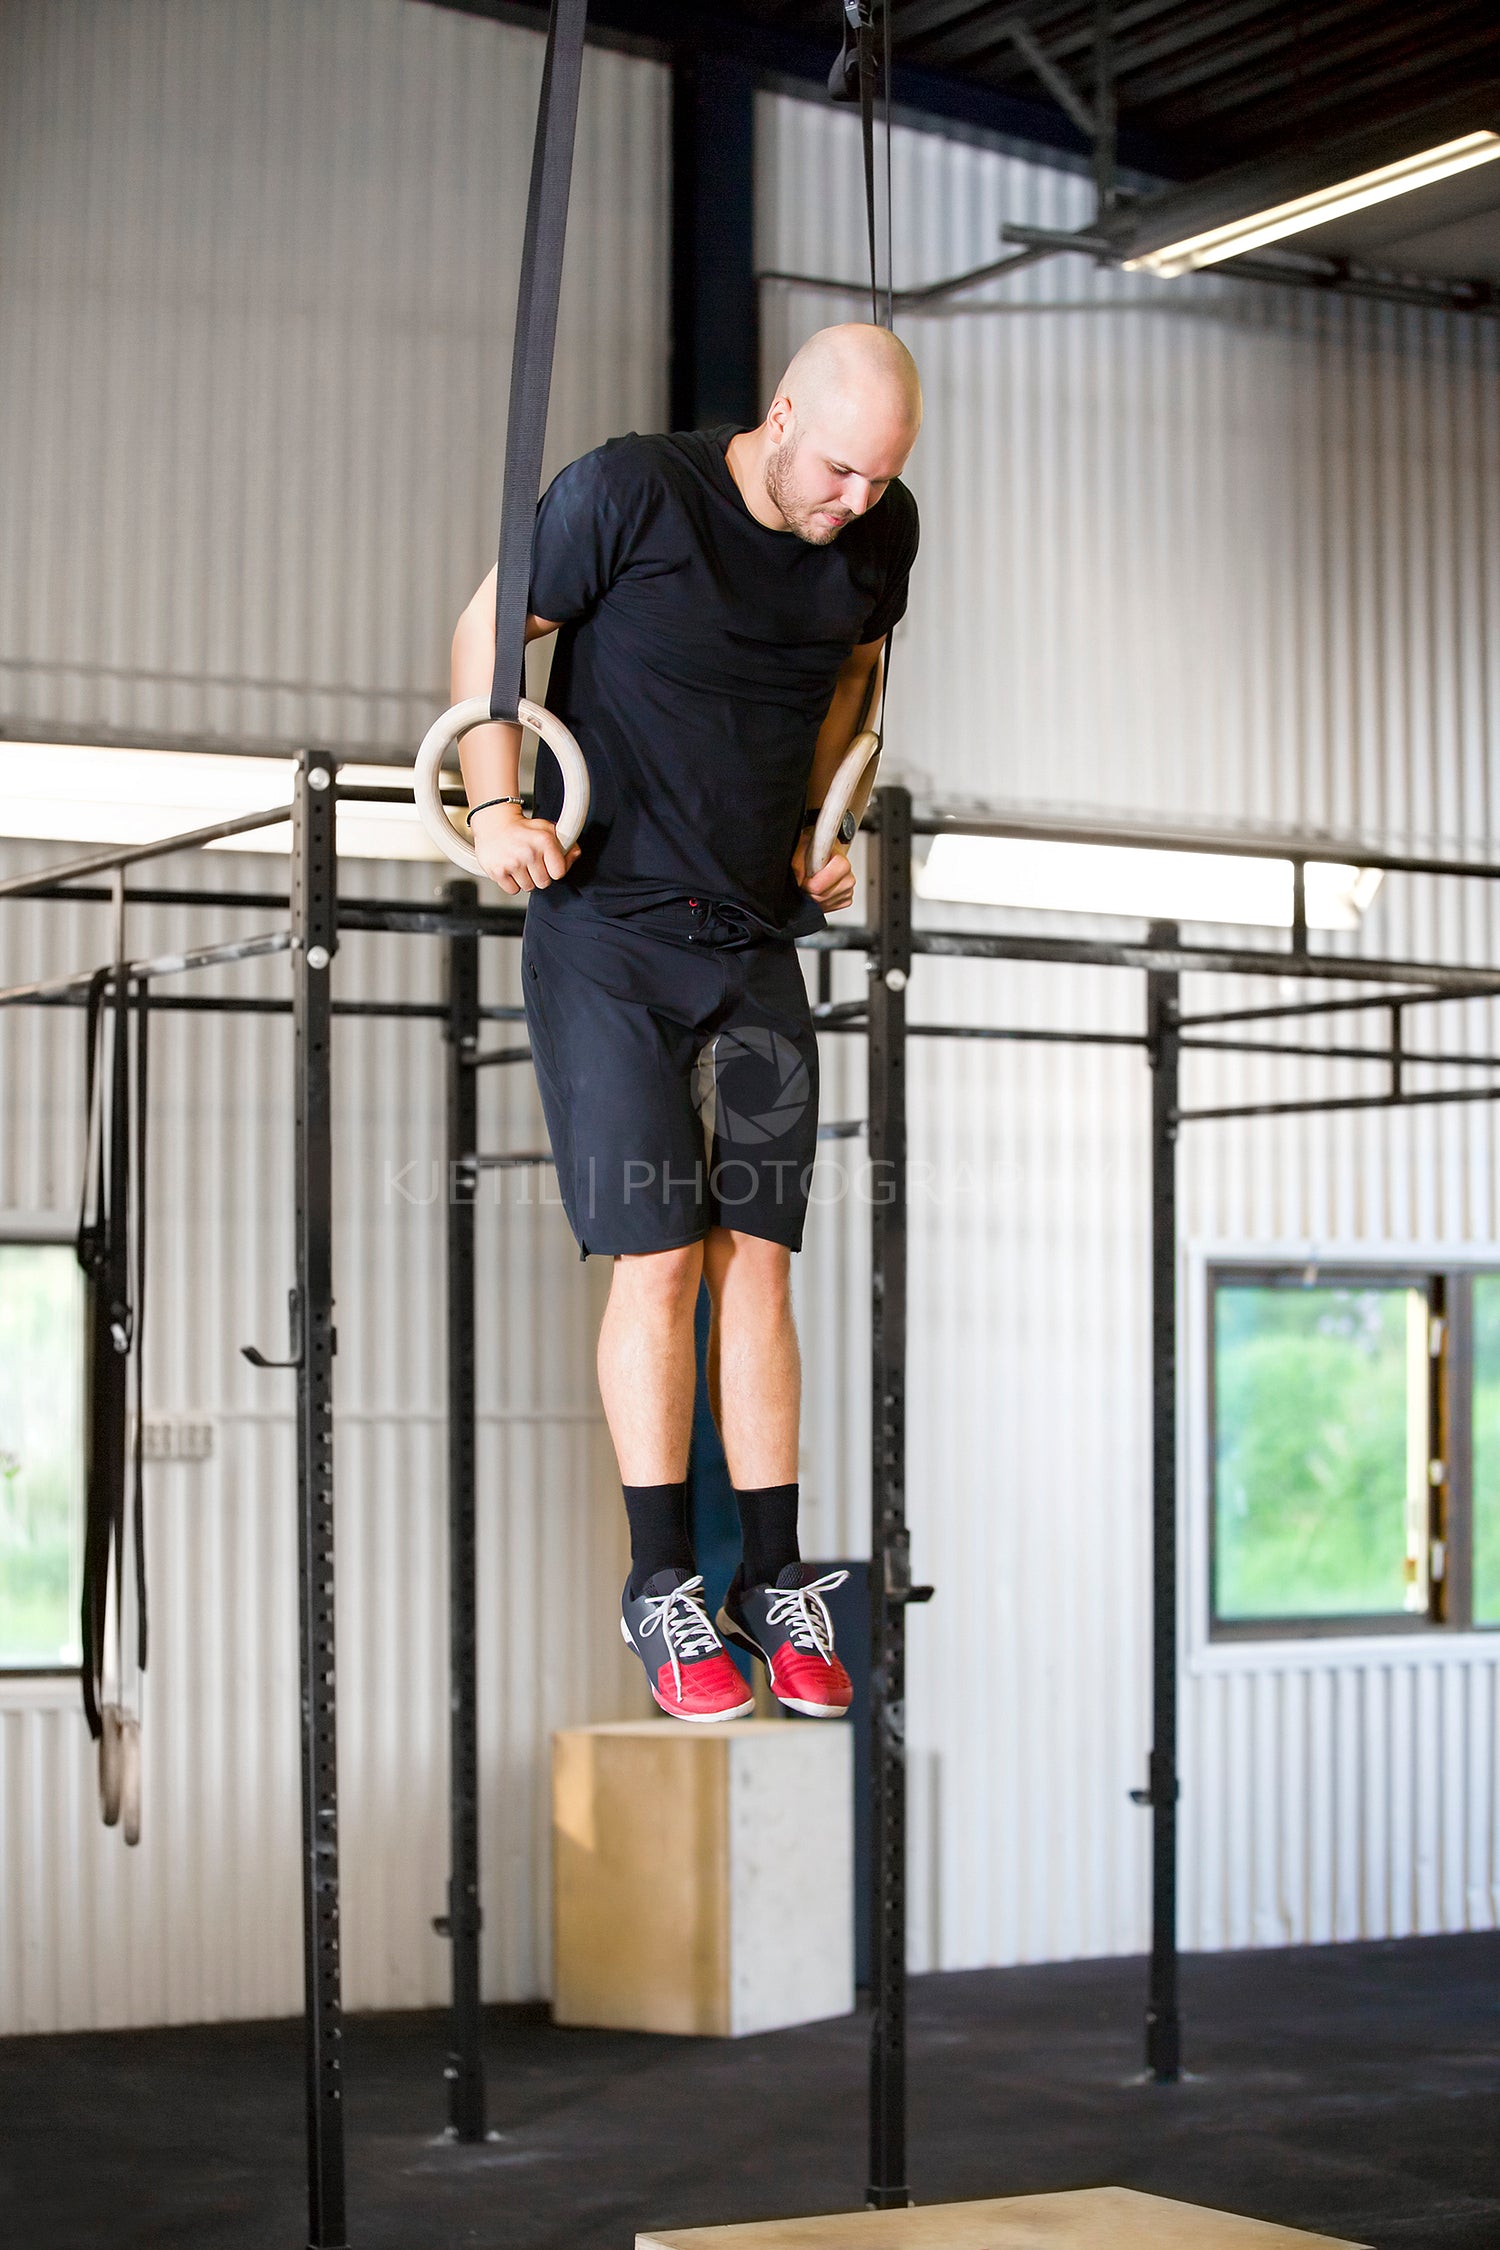 Determined Male Athlete Using Gymnastics Rings In Health Club